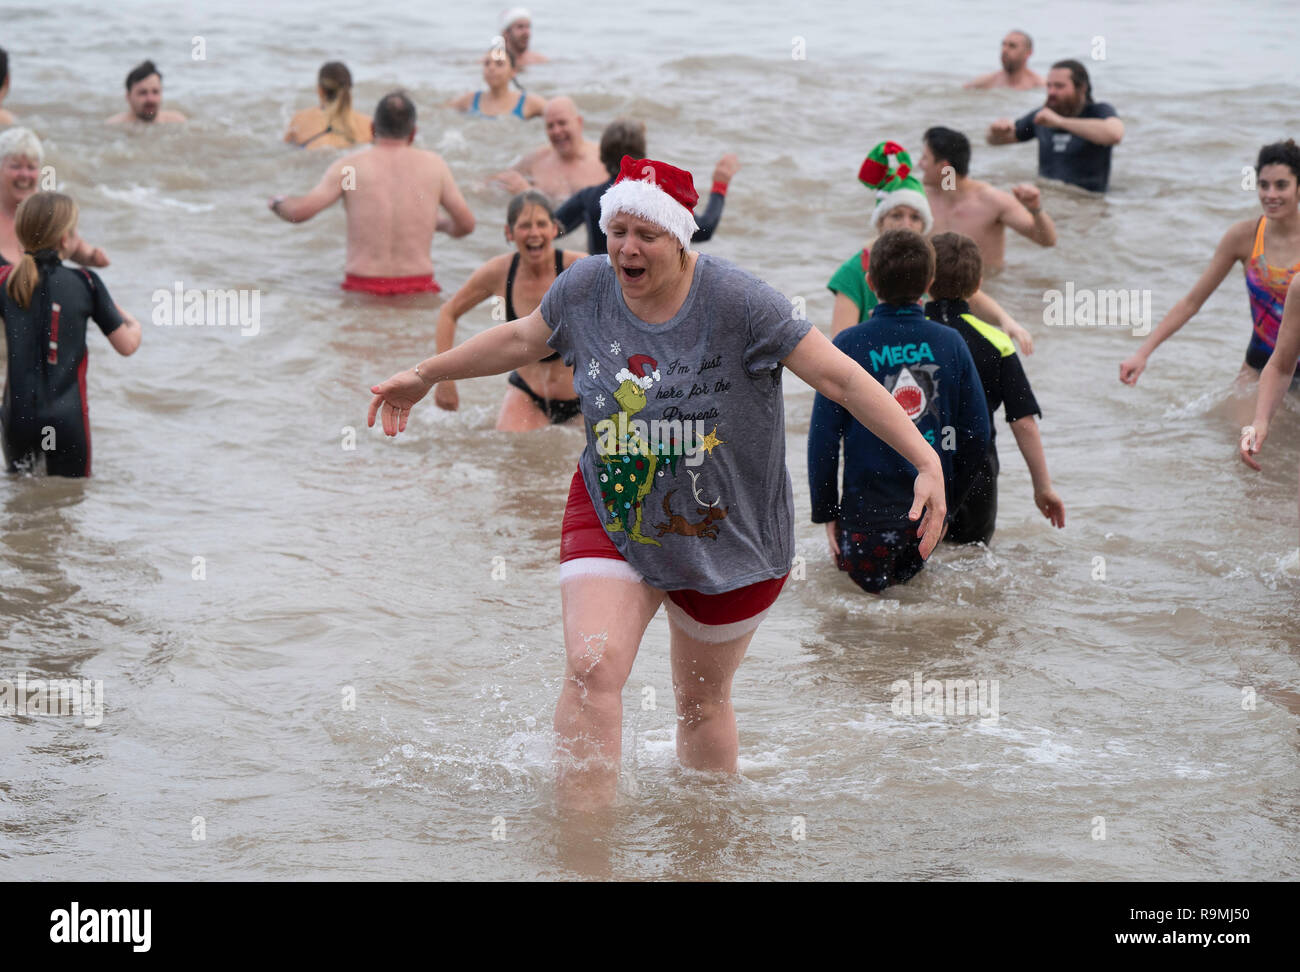 Overstrand, Norfolk, UK, 26th December, 2018. A crowd of hardy swimmers, dive into the sea at Overstrand in Norfolk, England, for the annual Boxing Day Dip, in aid of local charities, on December 26, 2018. Photo by David Levenson/Alamy Live News Stock Photo